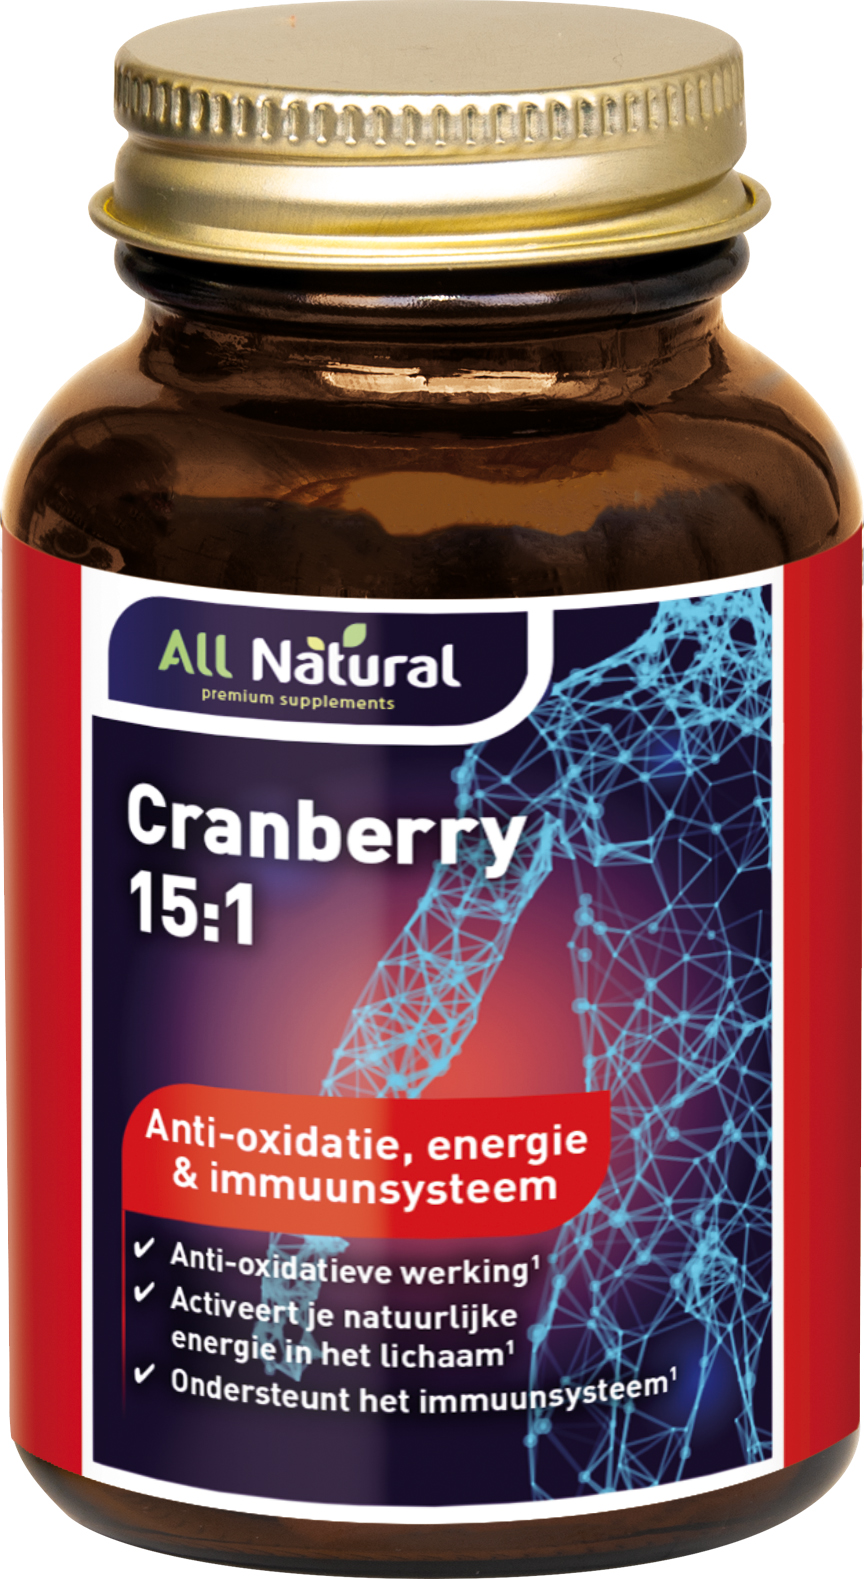 All Natural Cranberry 15:1 Tabletten